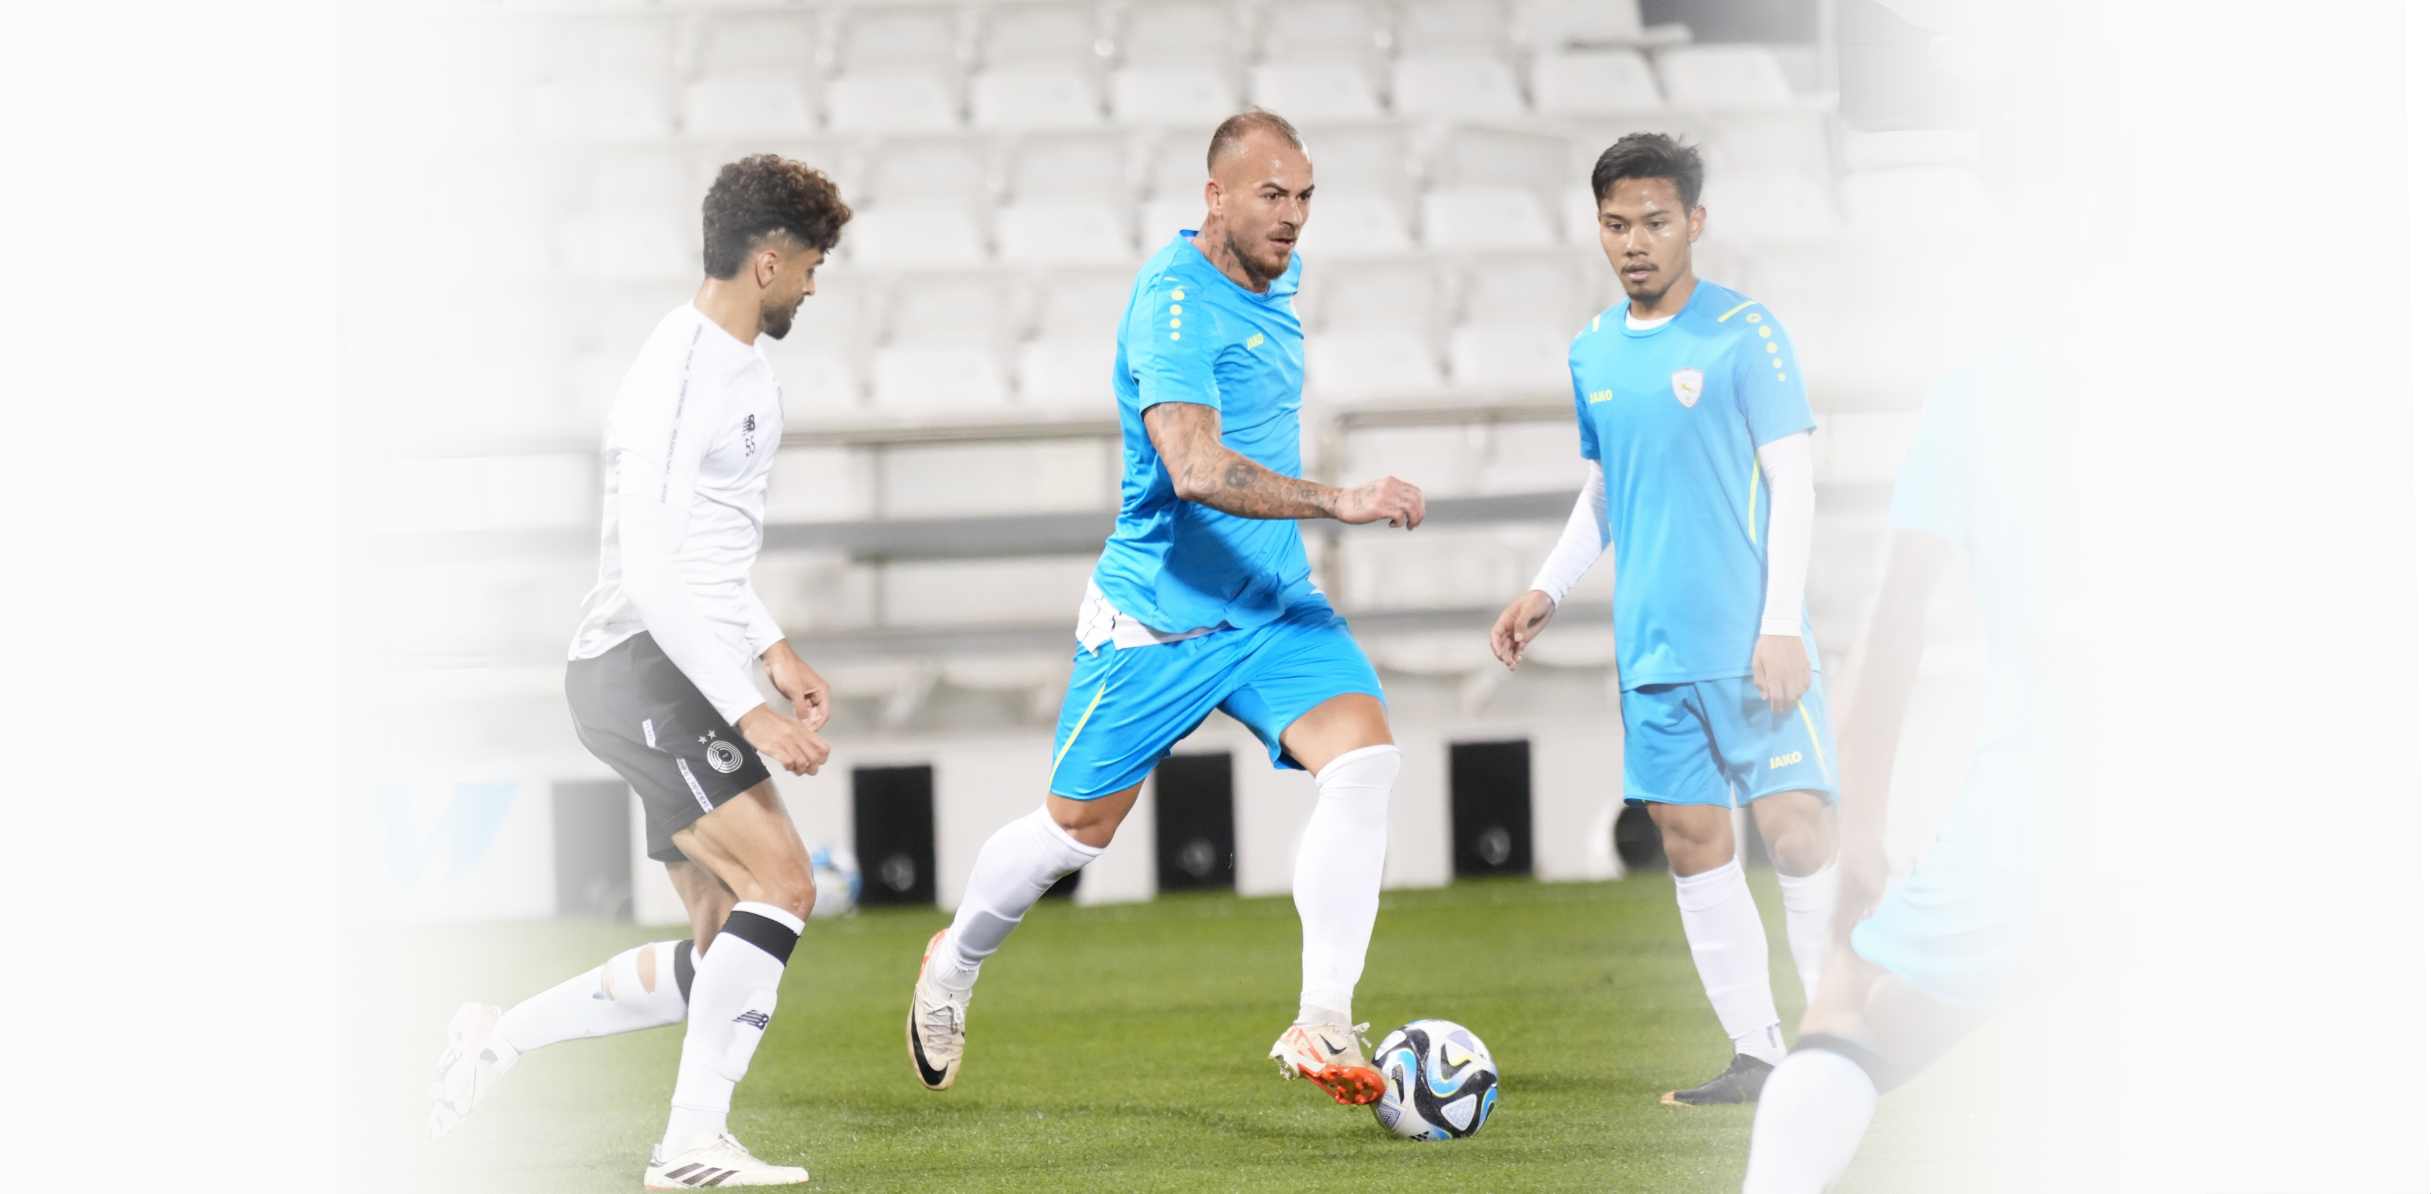 Our team loses to its counterpart Al-Sadd in a friendly match